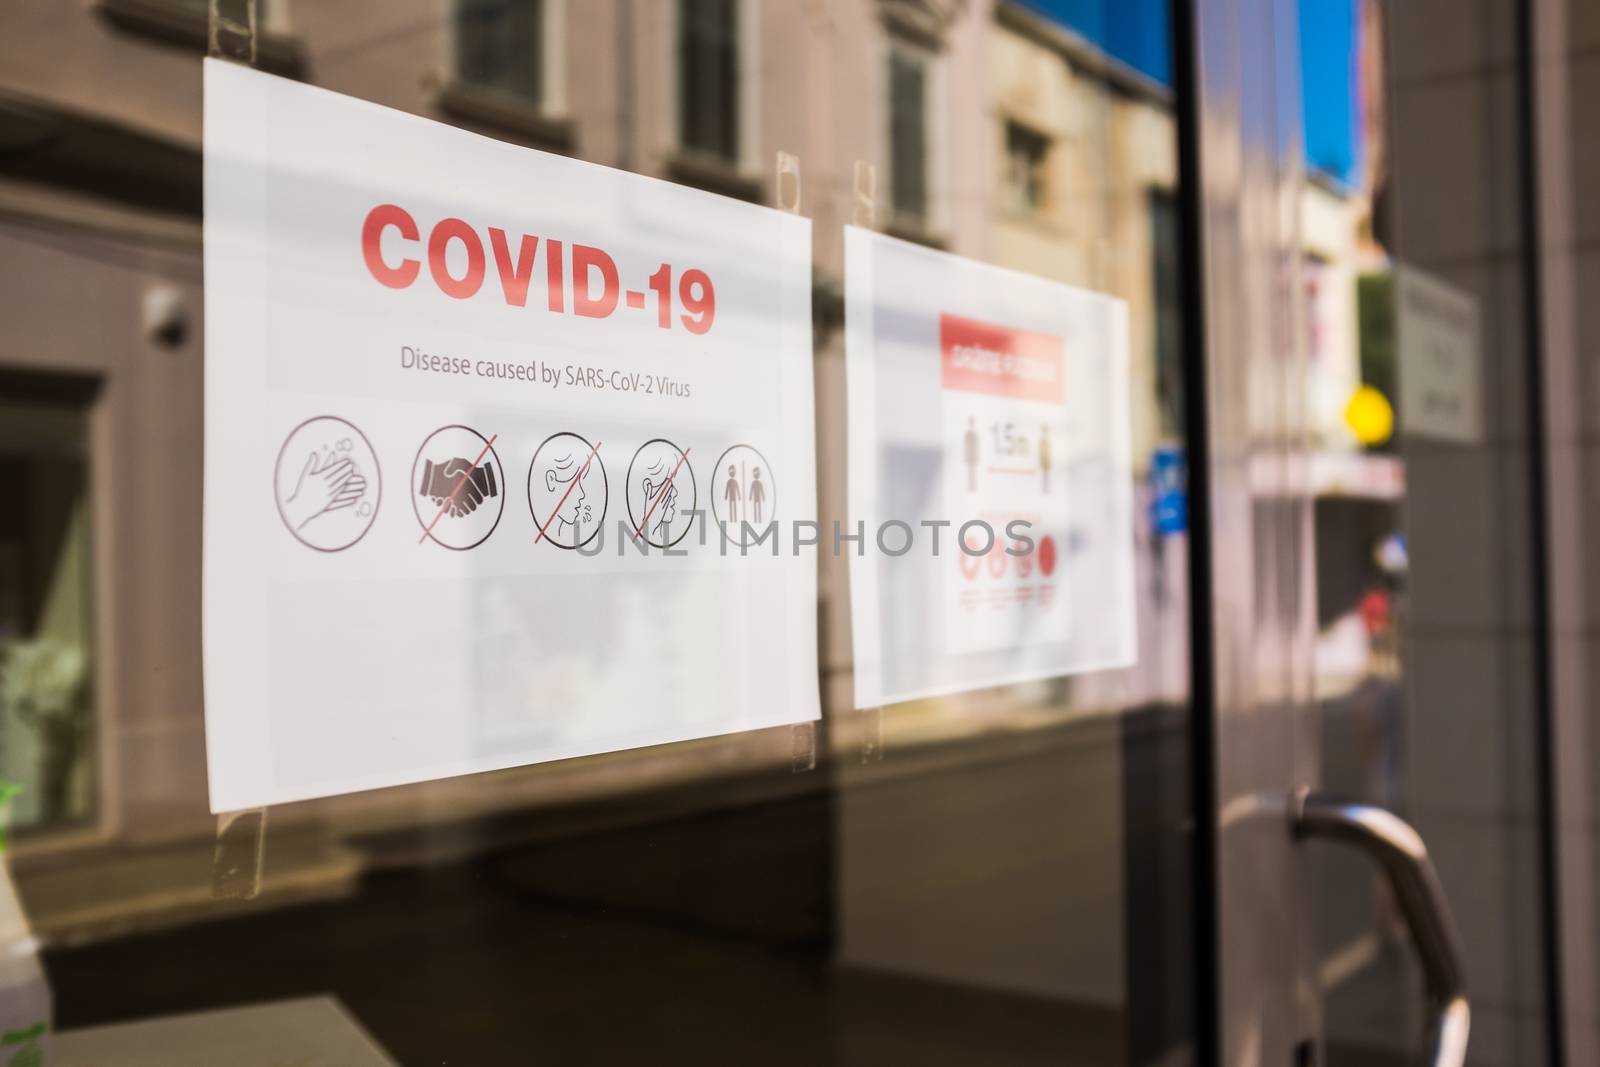 COVID-19 safety measures notice on store window by Plyushkin